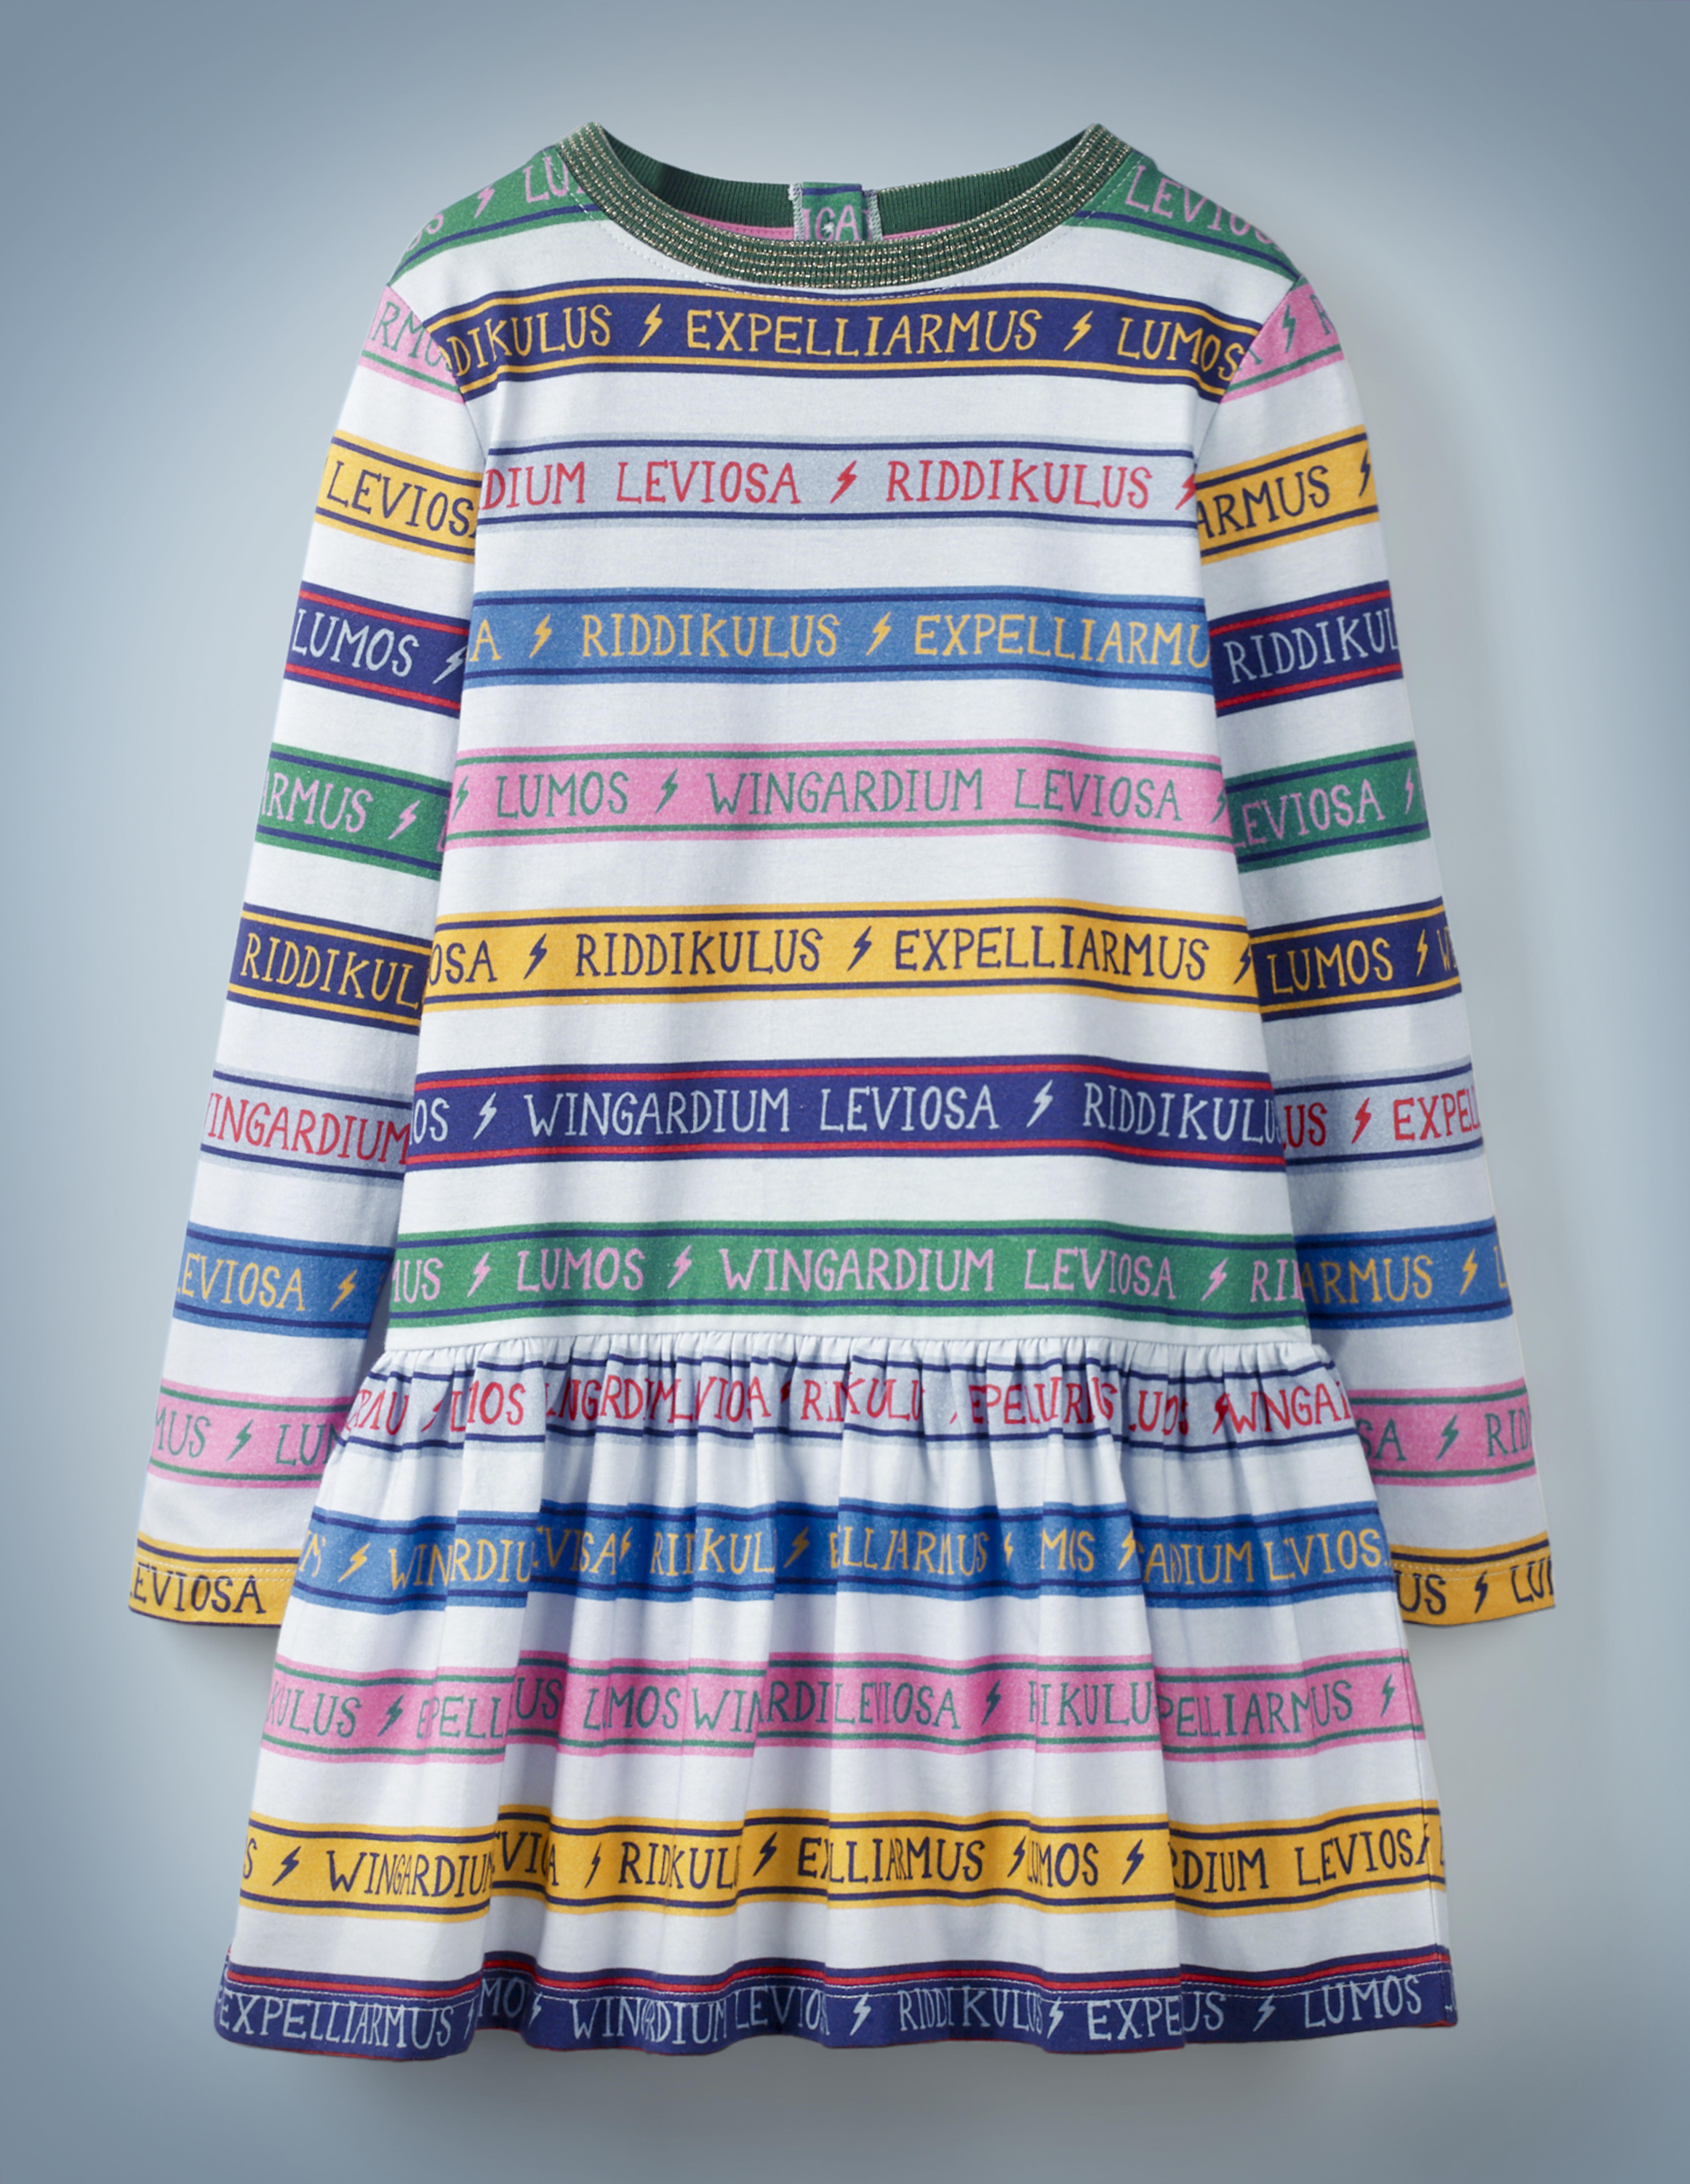 The Mini Boden Charms Class Stripe Dress, multi-color, features alternating white and colored stripes. The colored stripes include spell incantations separated by lightning bolts, including “Wingardium Leviosa,” “Riddikulus,” “Expelliarmus,” and “Lumos.” It retails at £28.